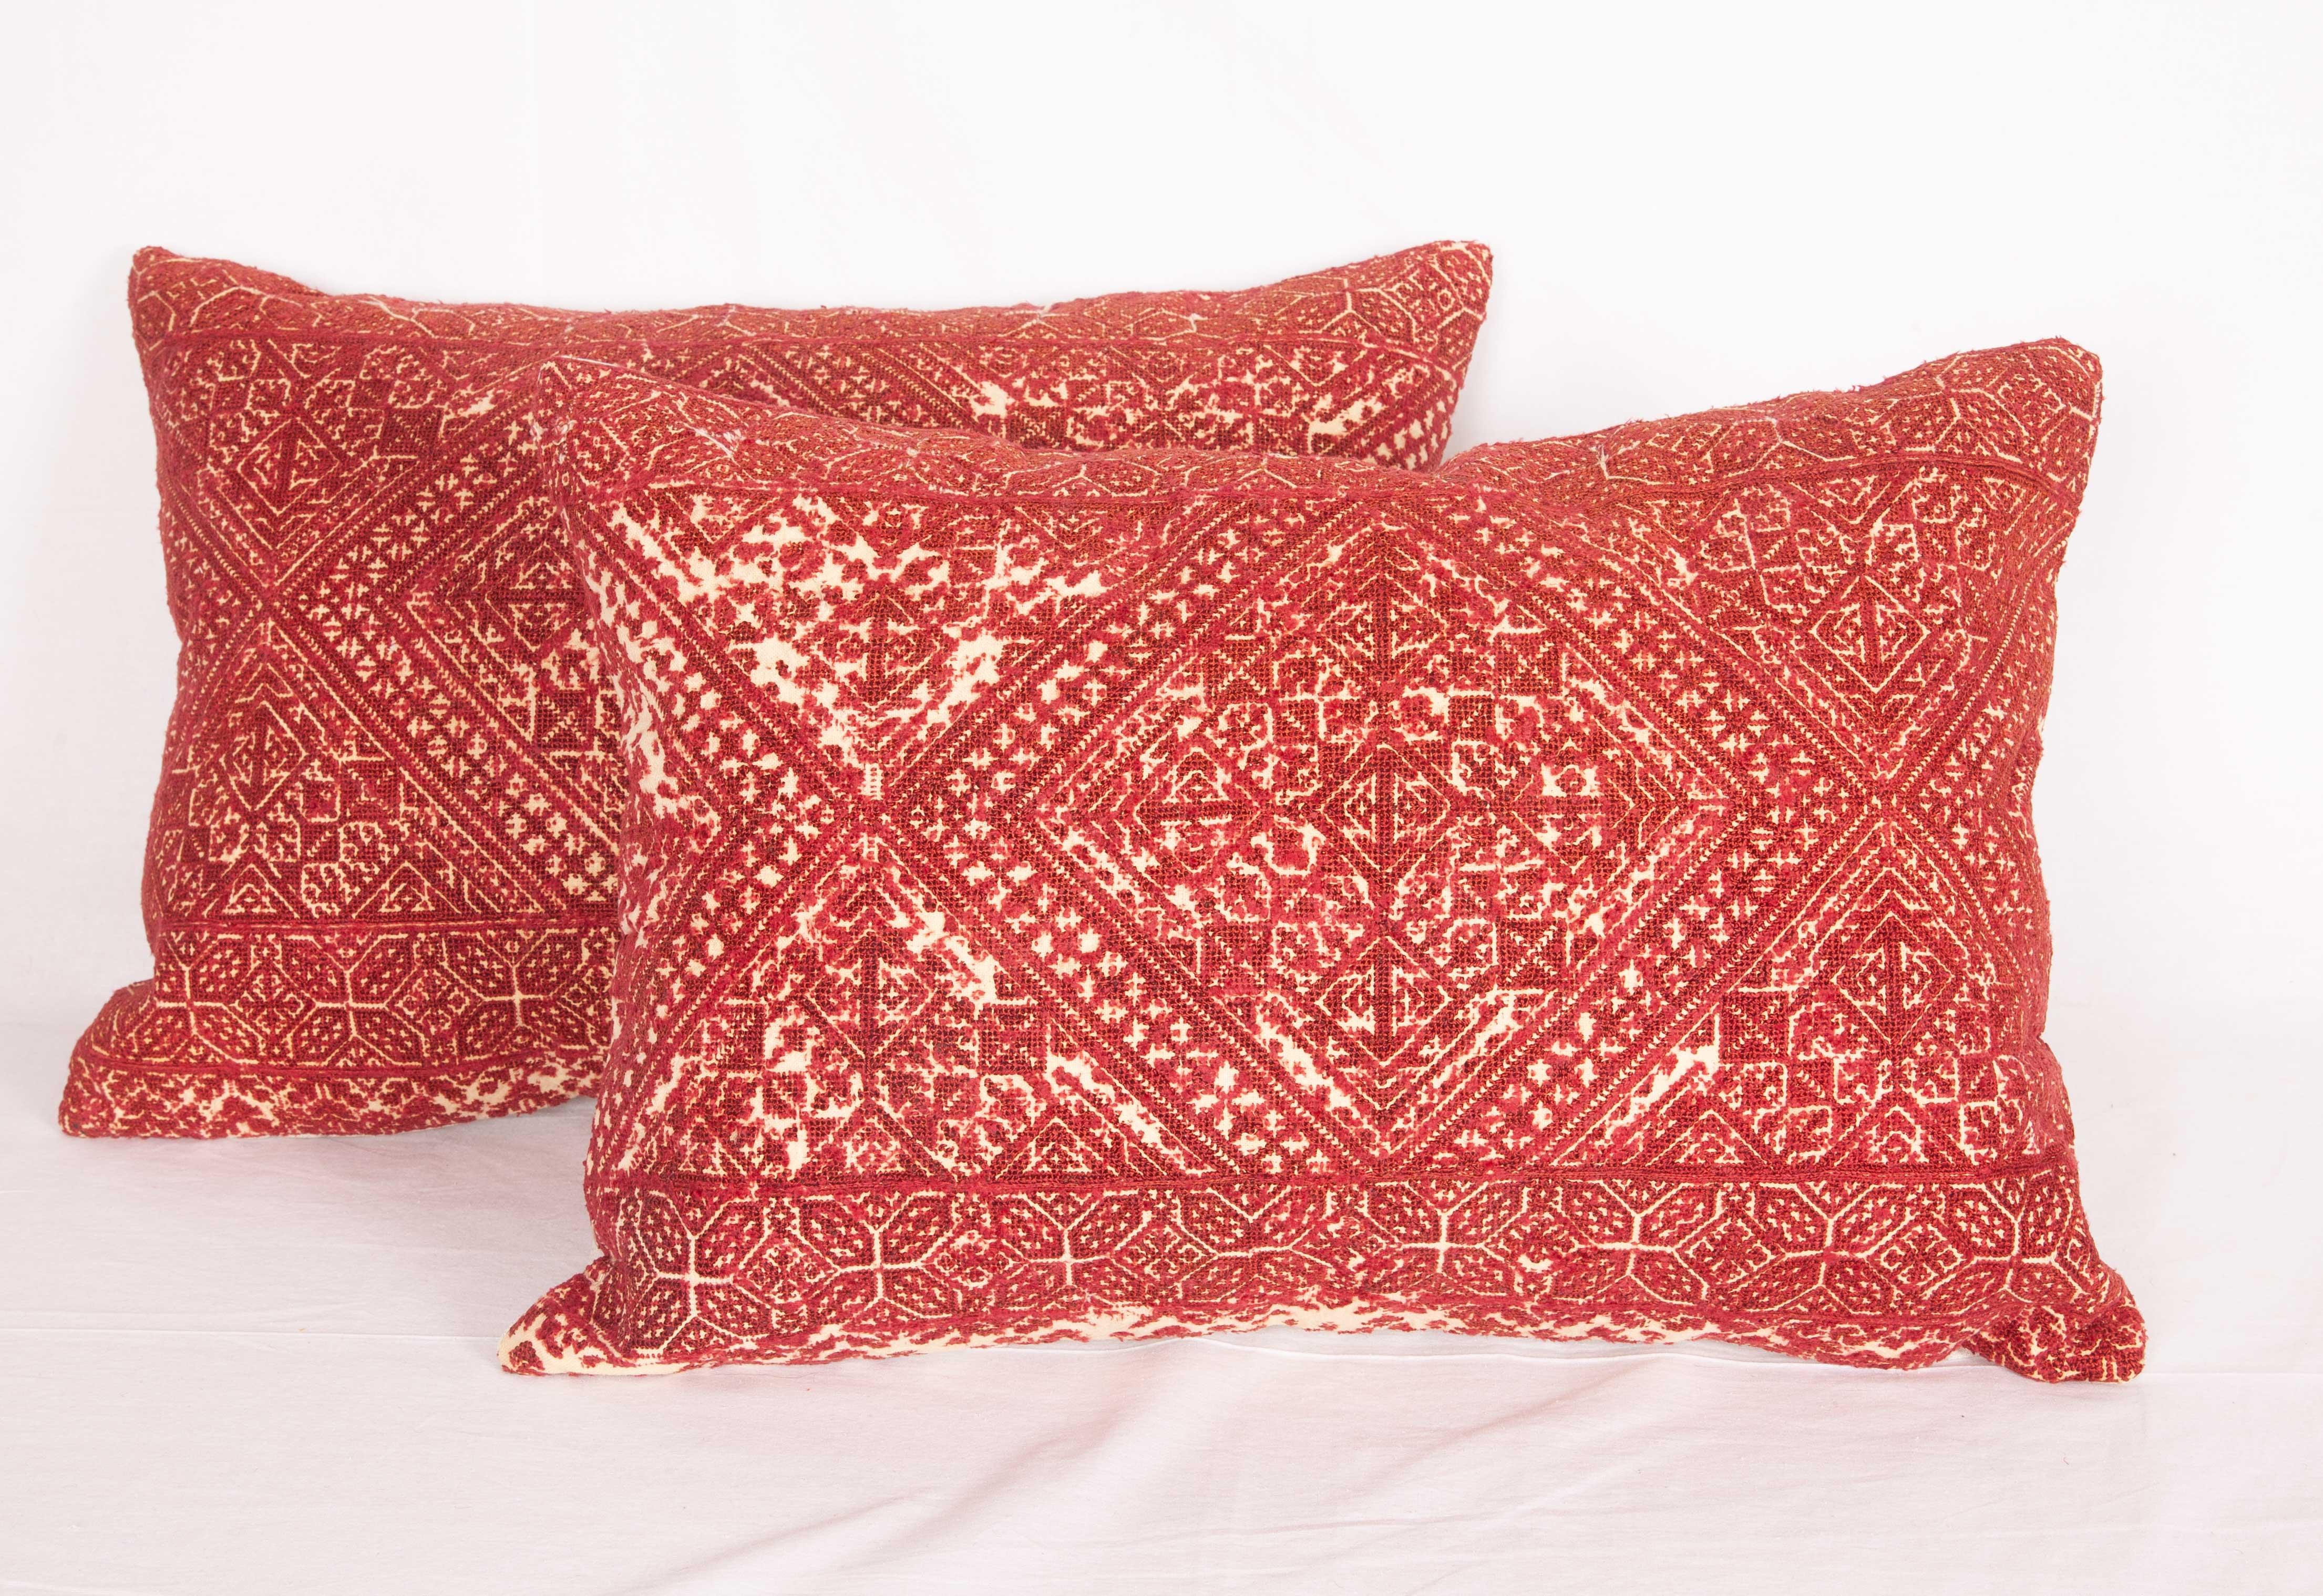 Embroidered Moroccan Pillow Cases Fashioned from a Fez Embroidery, Early 20th Century